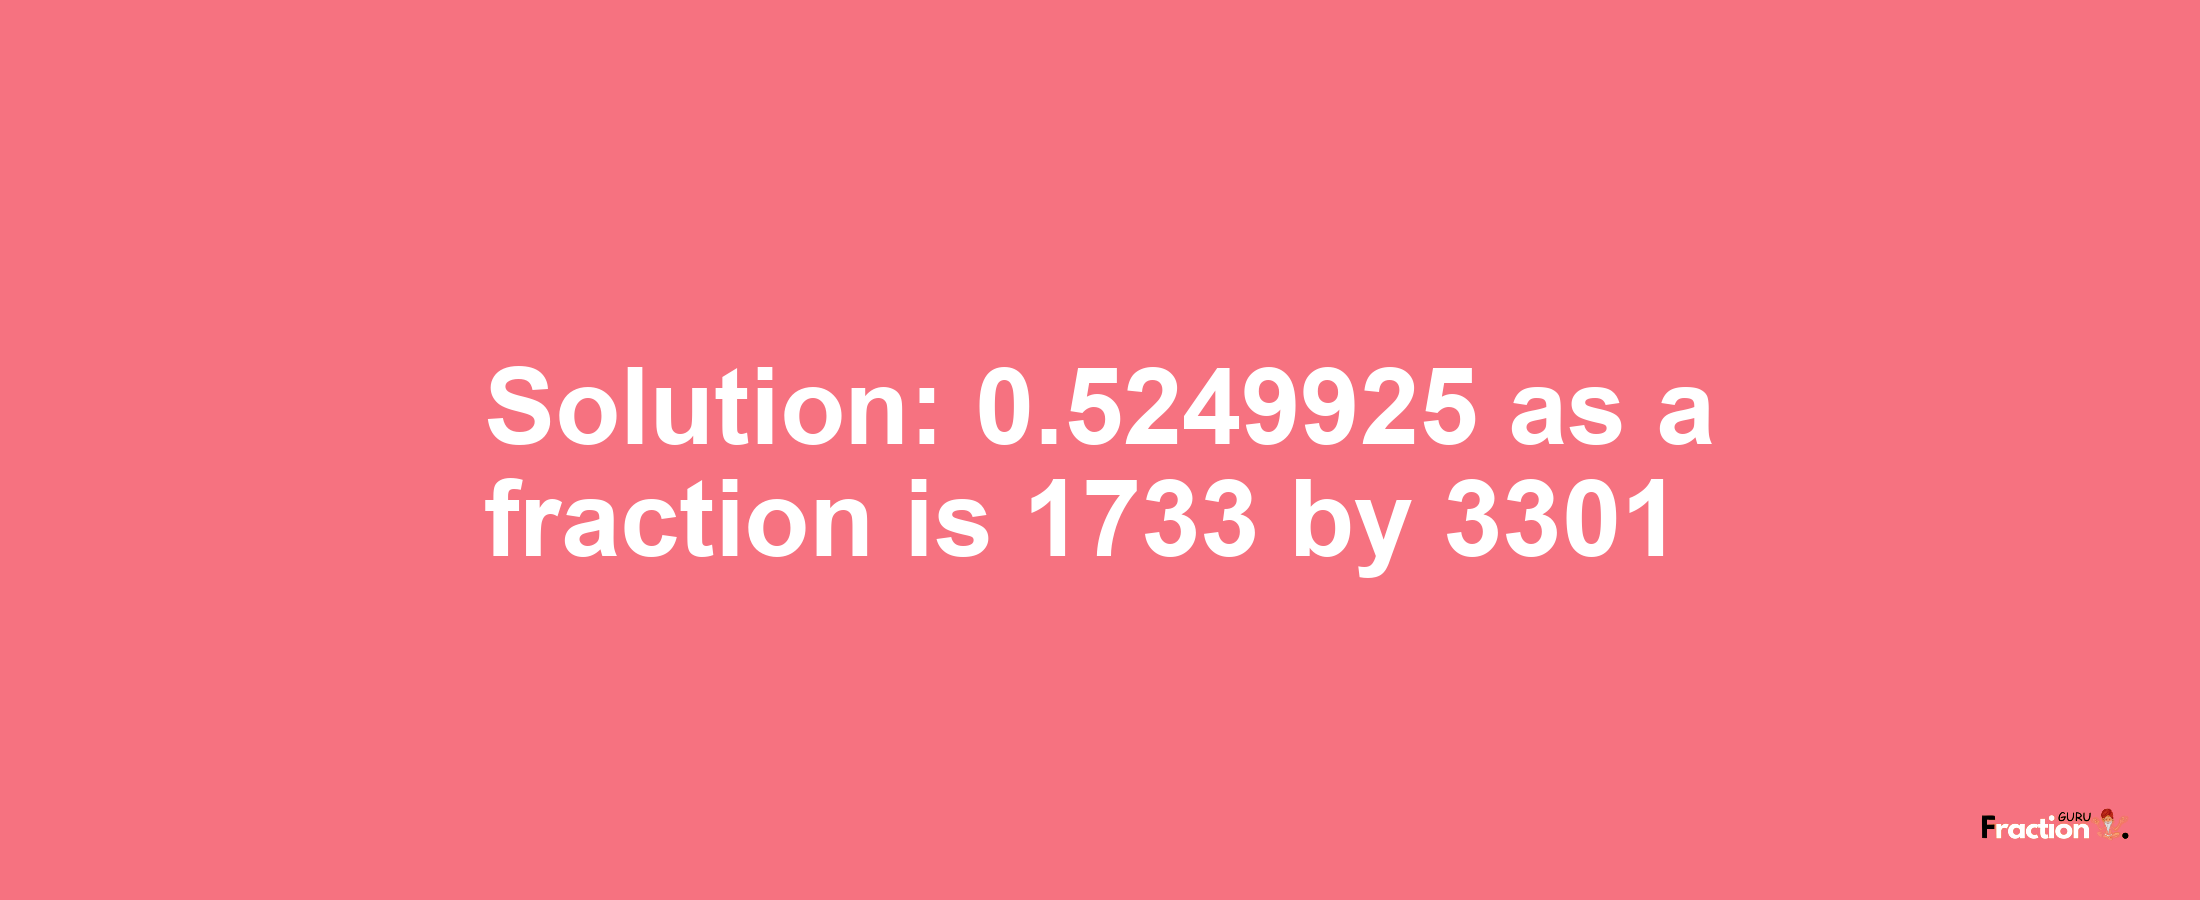 Solution:0.5249925 as a fraction is 1733/3301